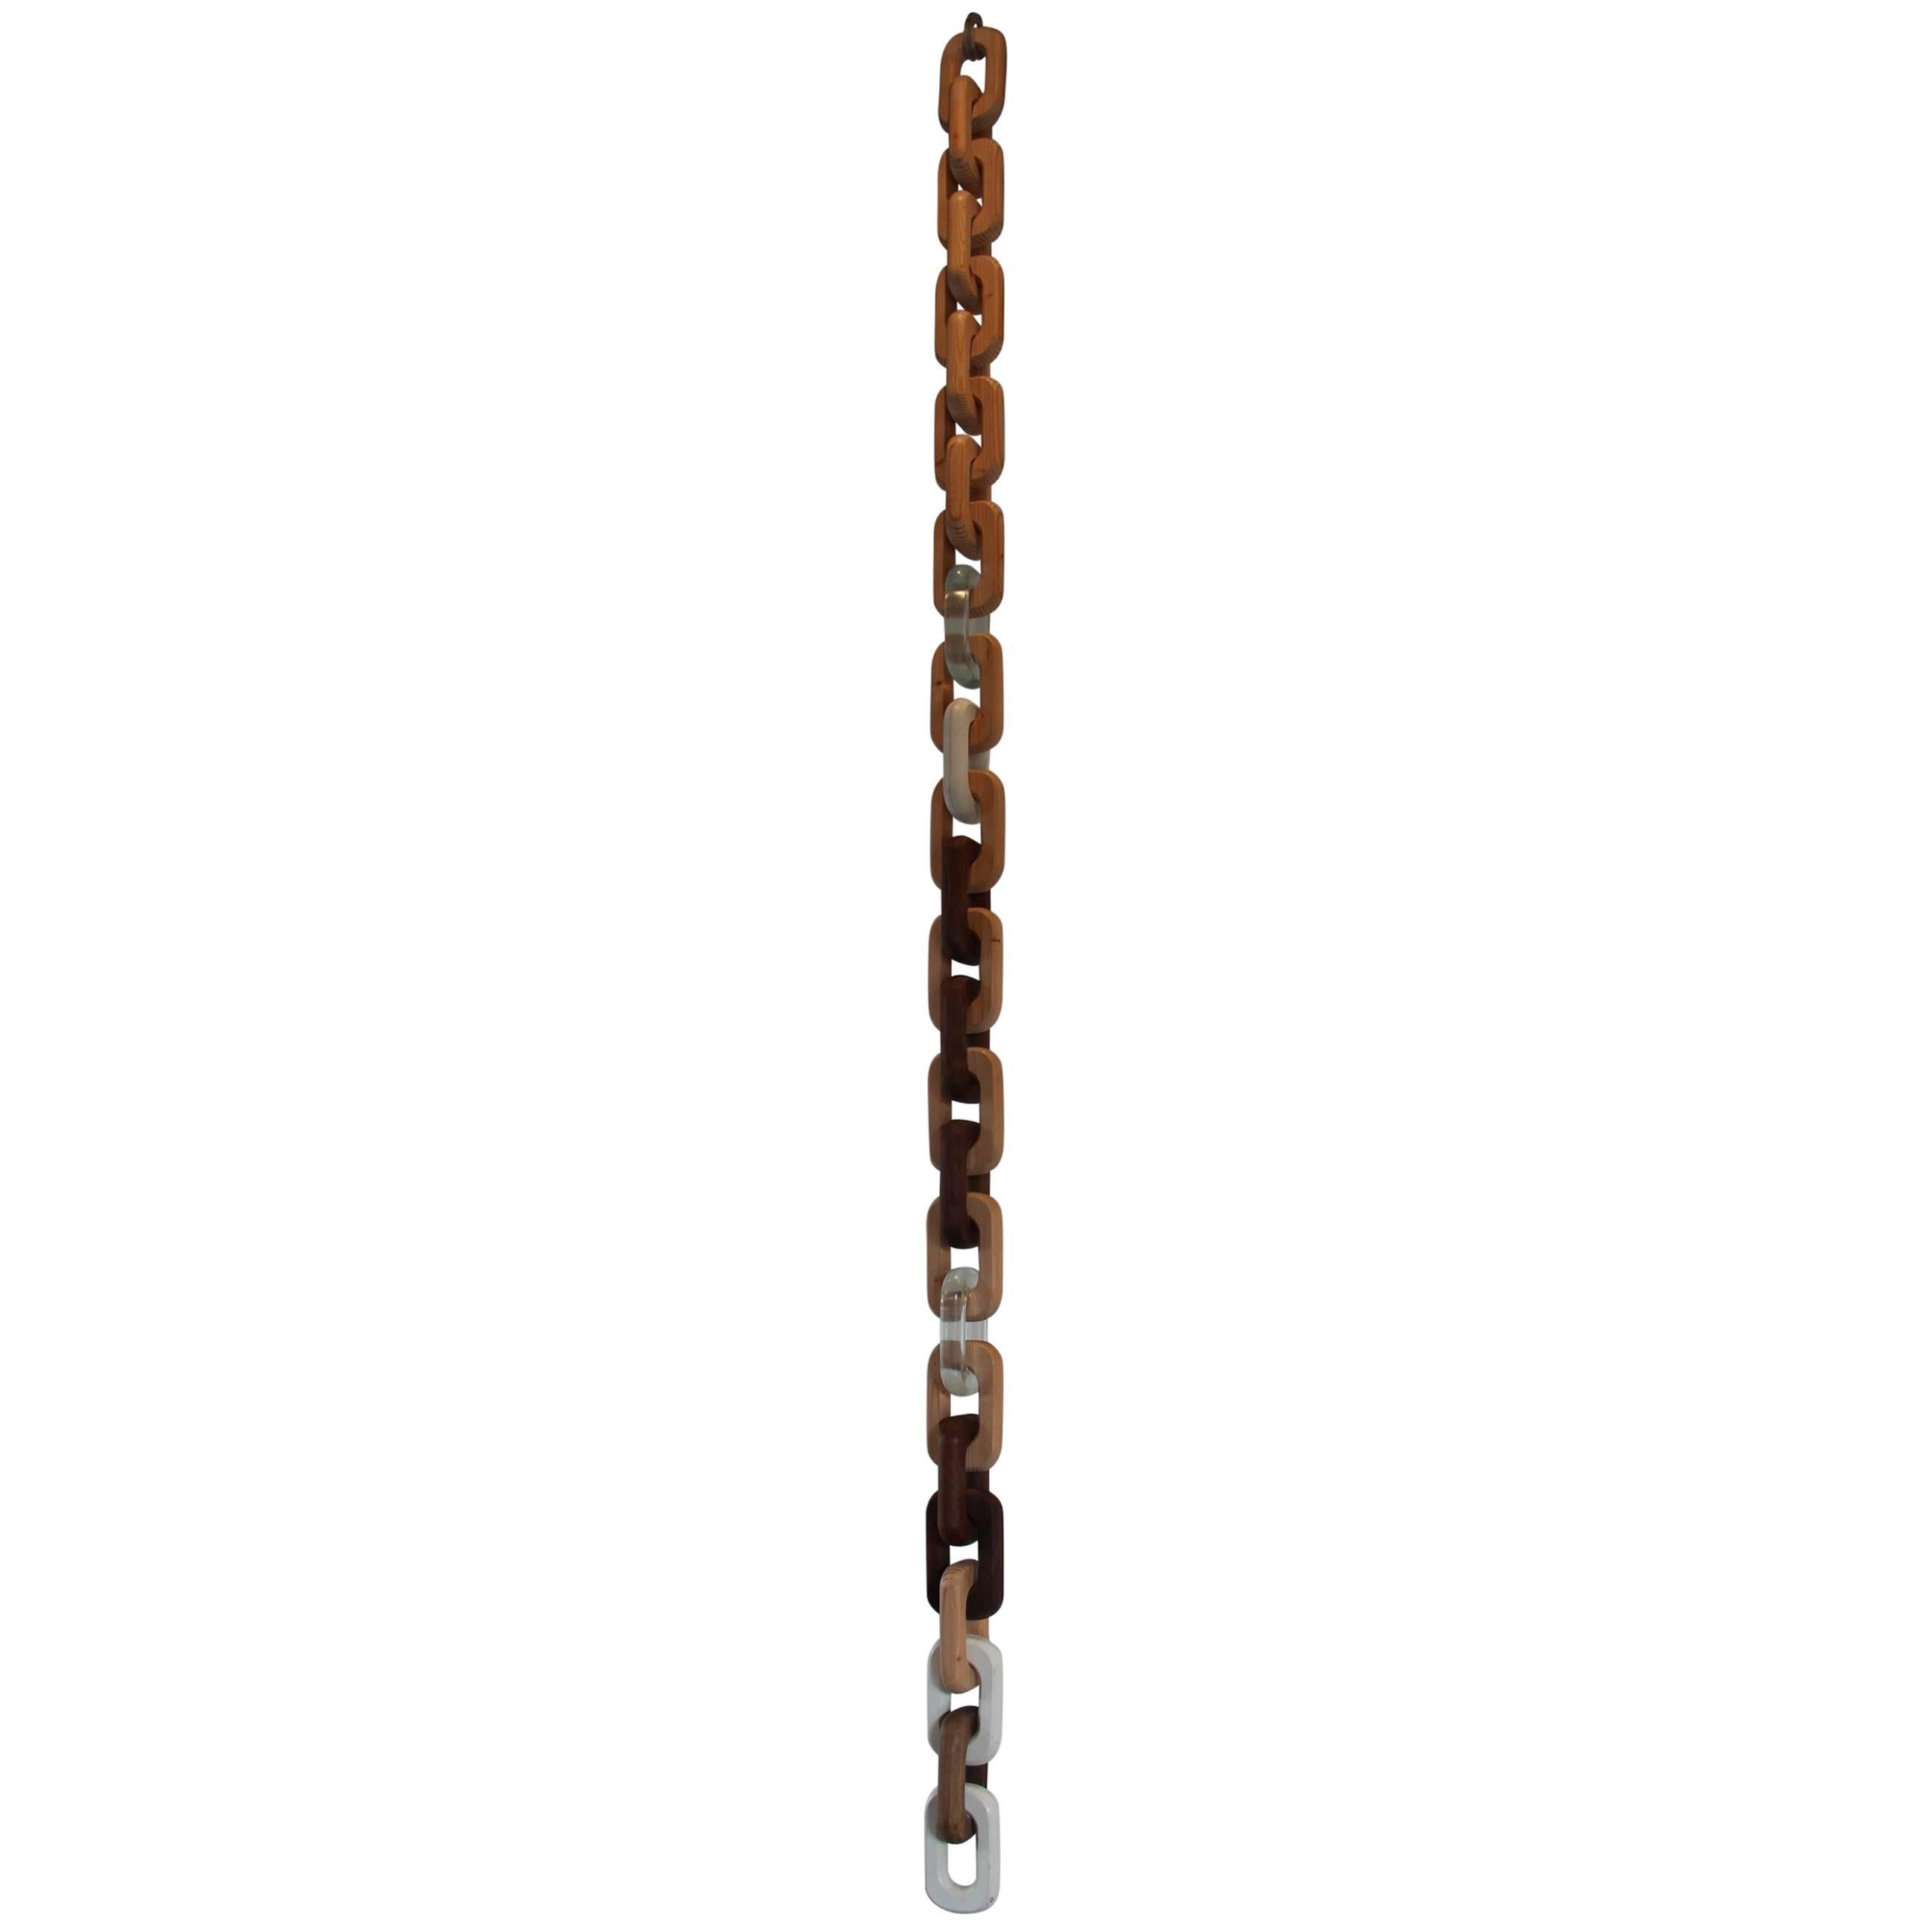 Chain Decorative Object Hanging Sculpture Walnut, Fir, Concrete, Resin -In stock